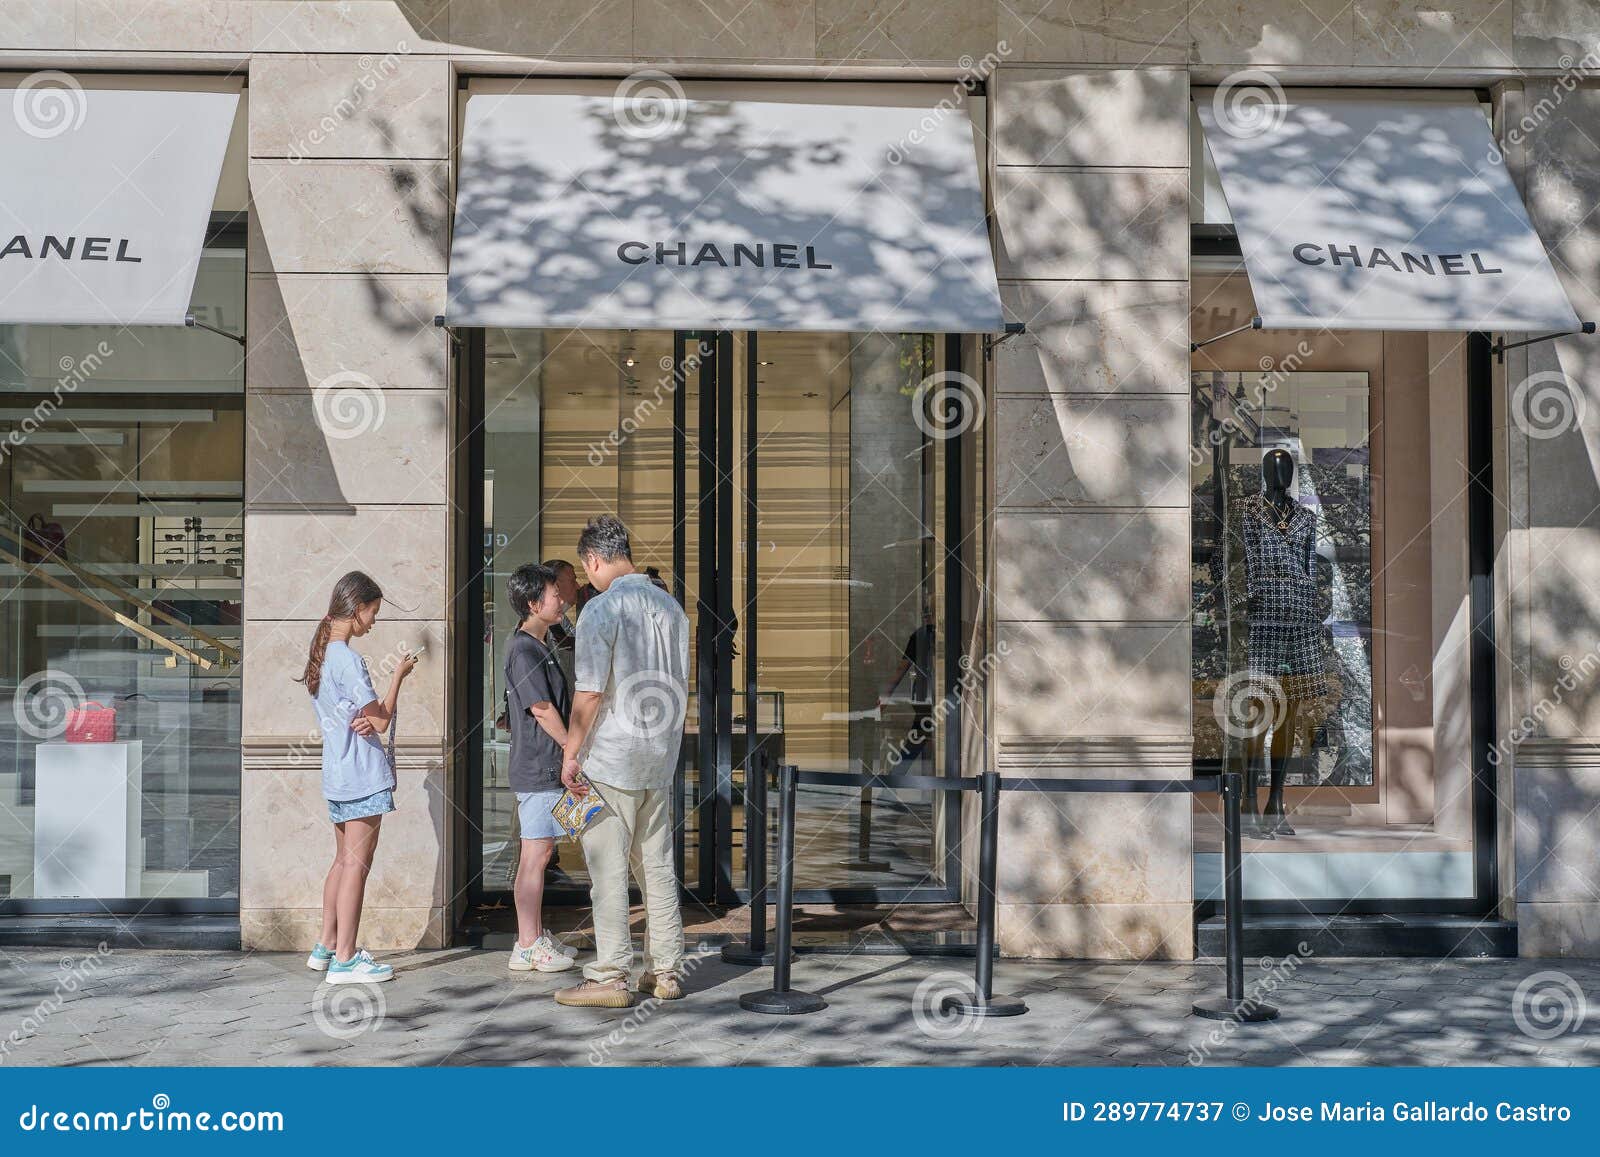 173 Entrance Chanel Store Stock Photos - Free & Royalty-Free Stock Photos  from Dreamstime